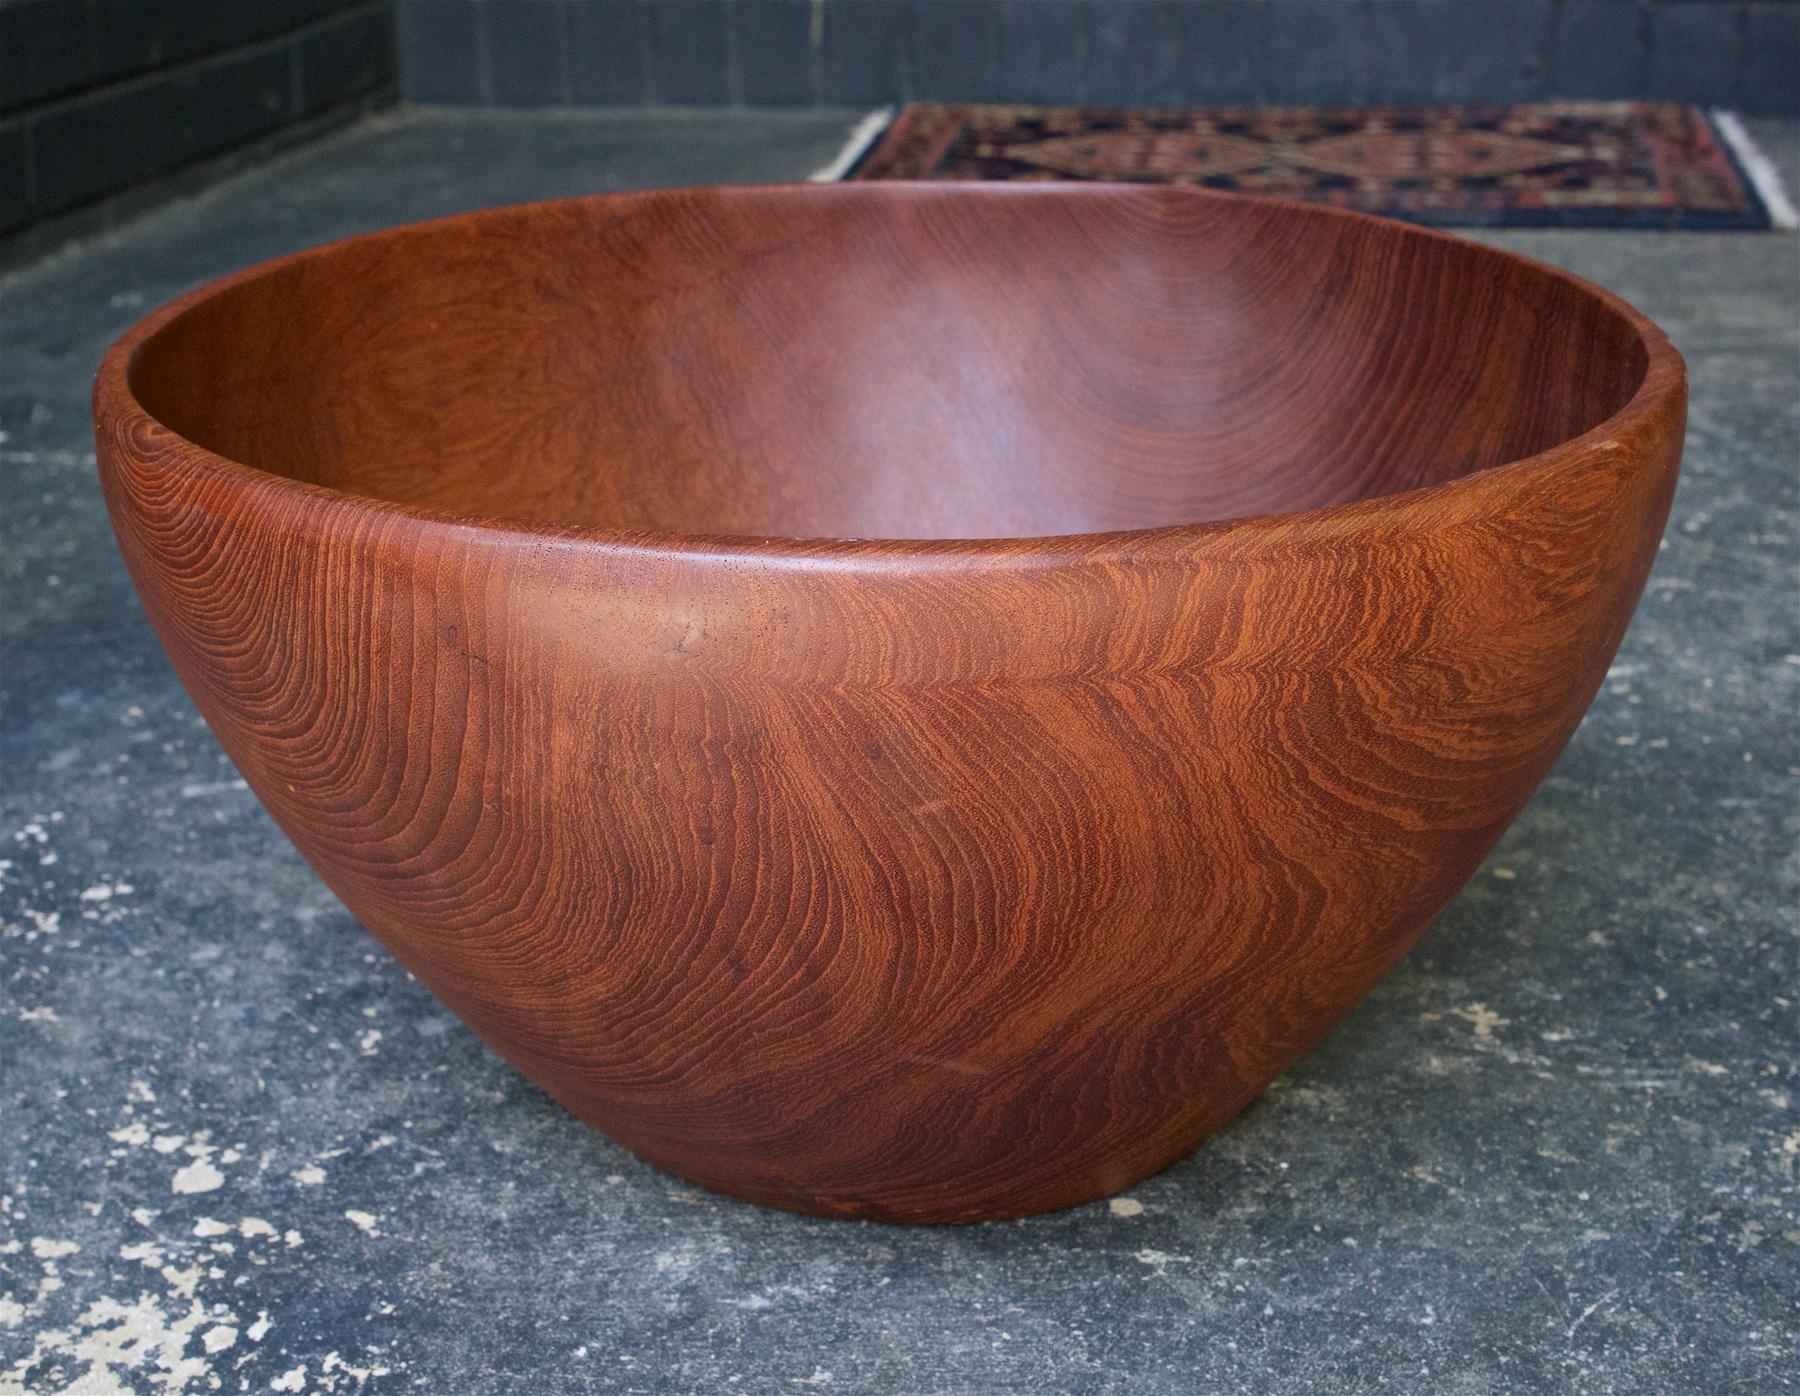 Extra-large 15.25 inch diameter salad bowl, would probably serve 6-8.